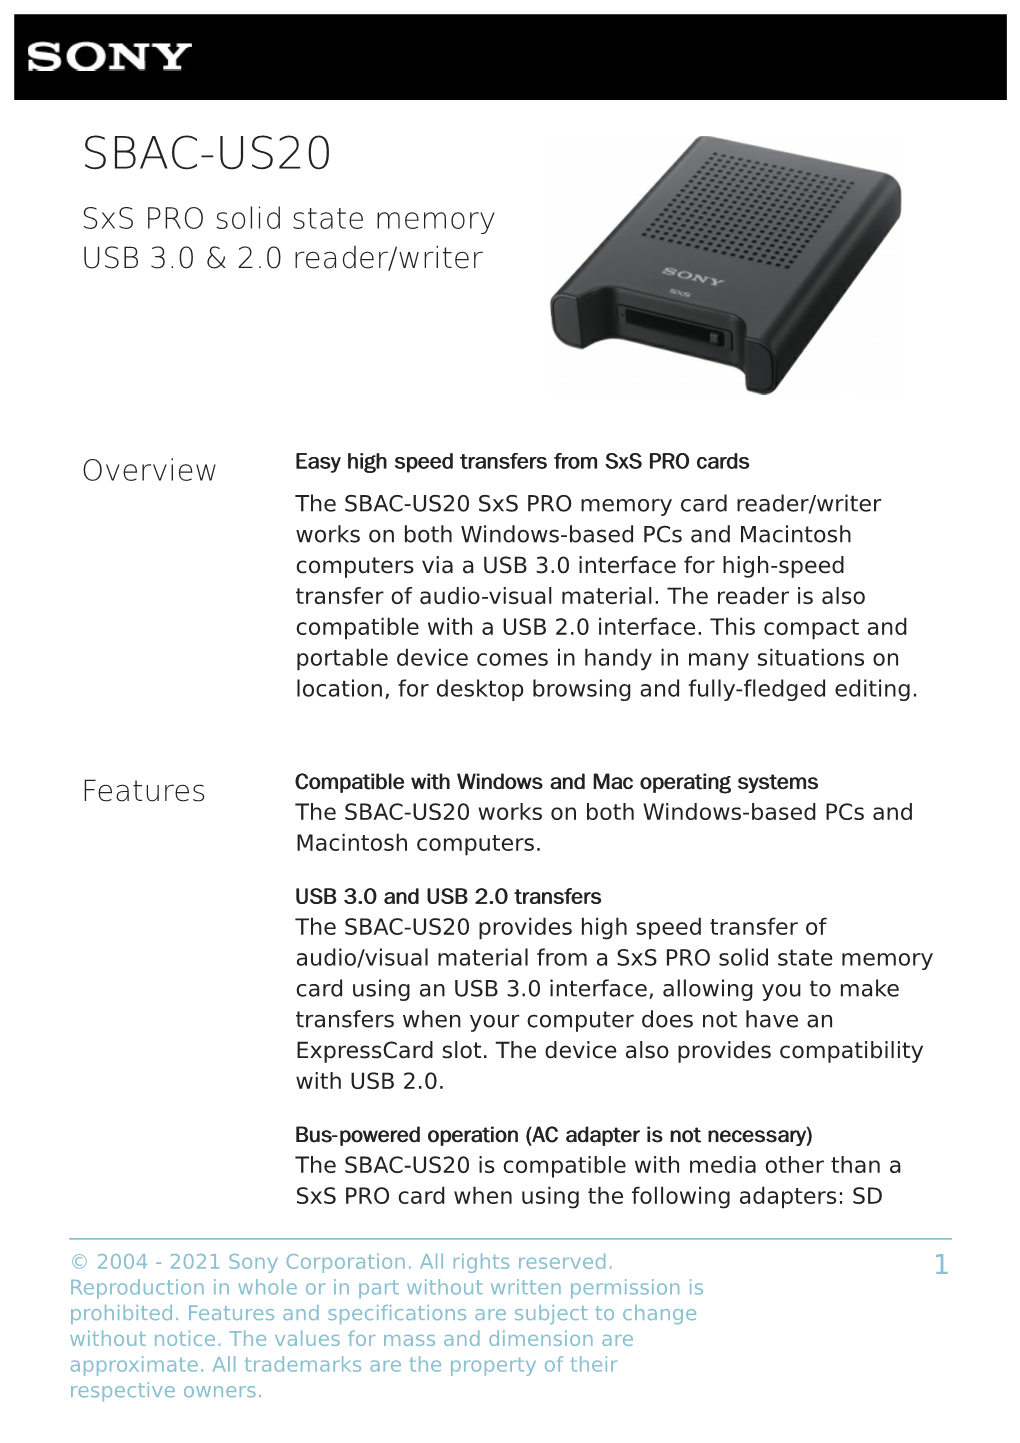 SBAC-US20 Sxs PRO Solid State Memory USB 3.0 & 2.0 Reader/Writer